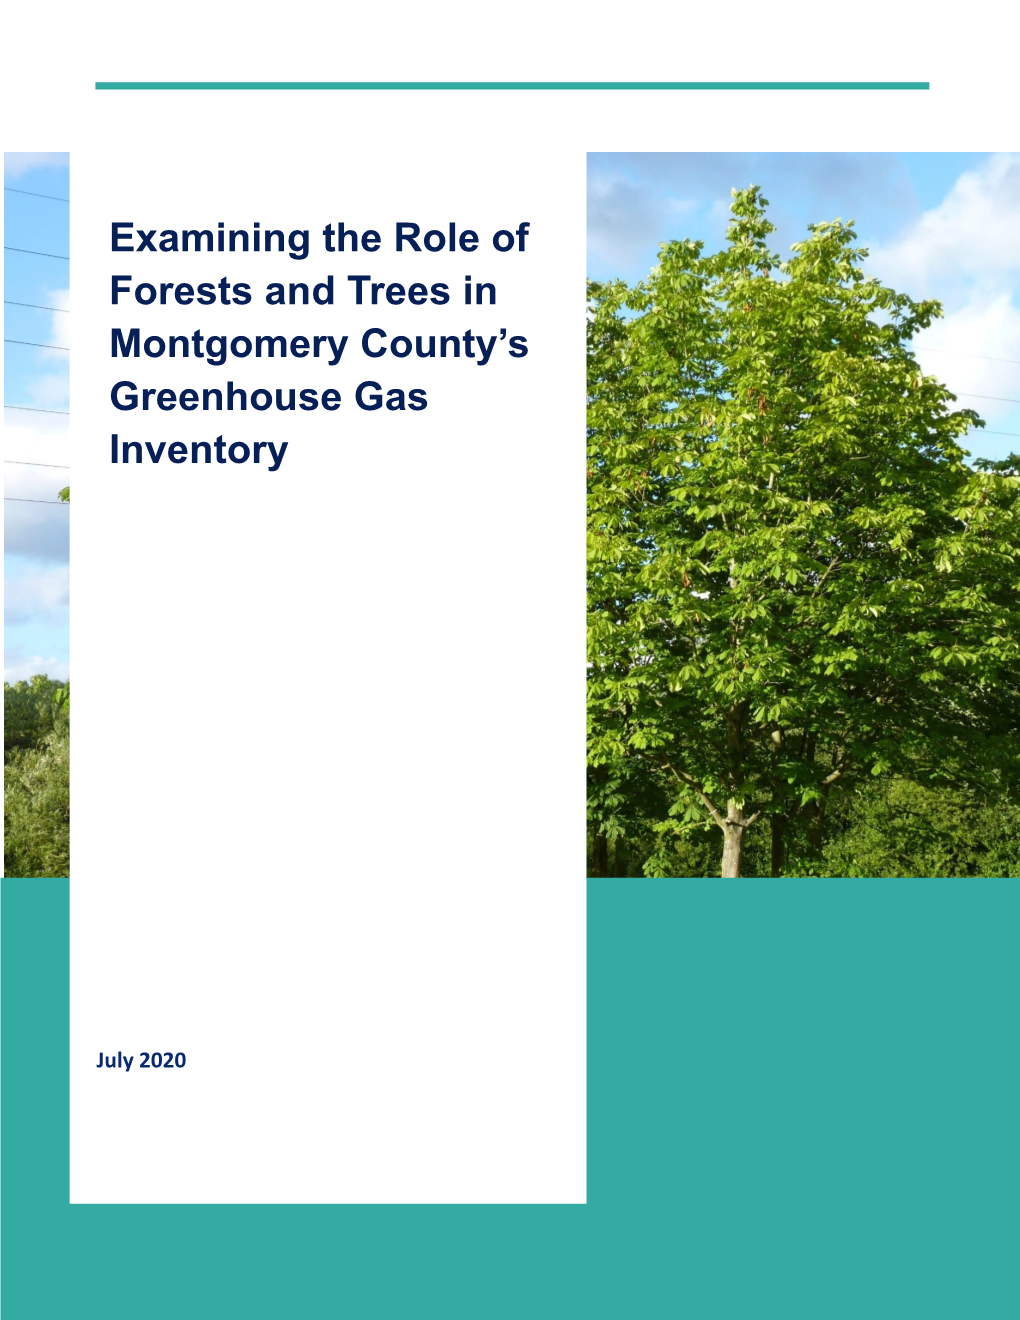 Examining the Role of Forests and Trees in Montgomery County's